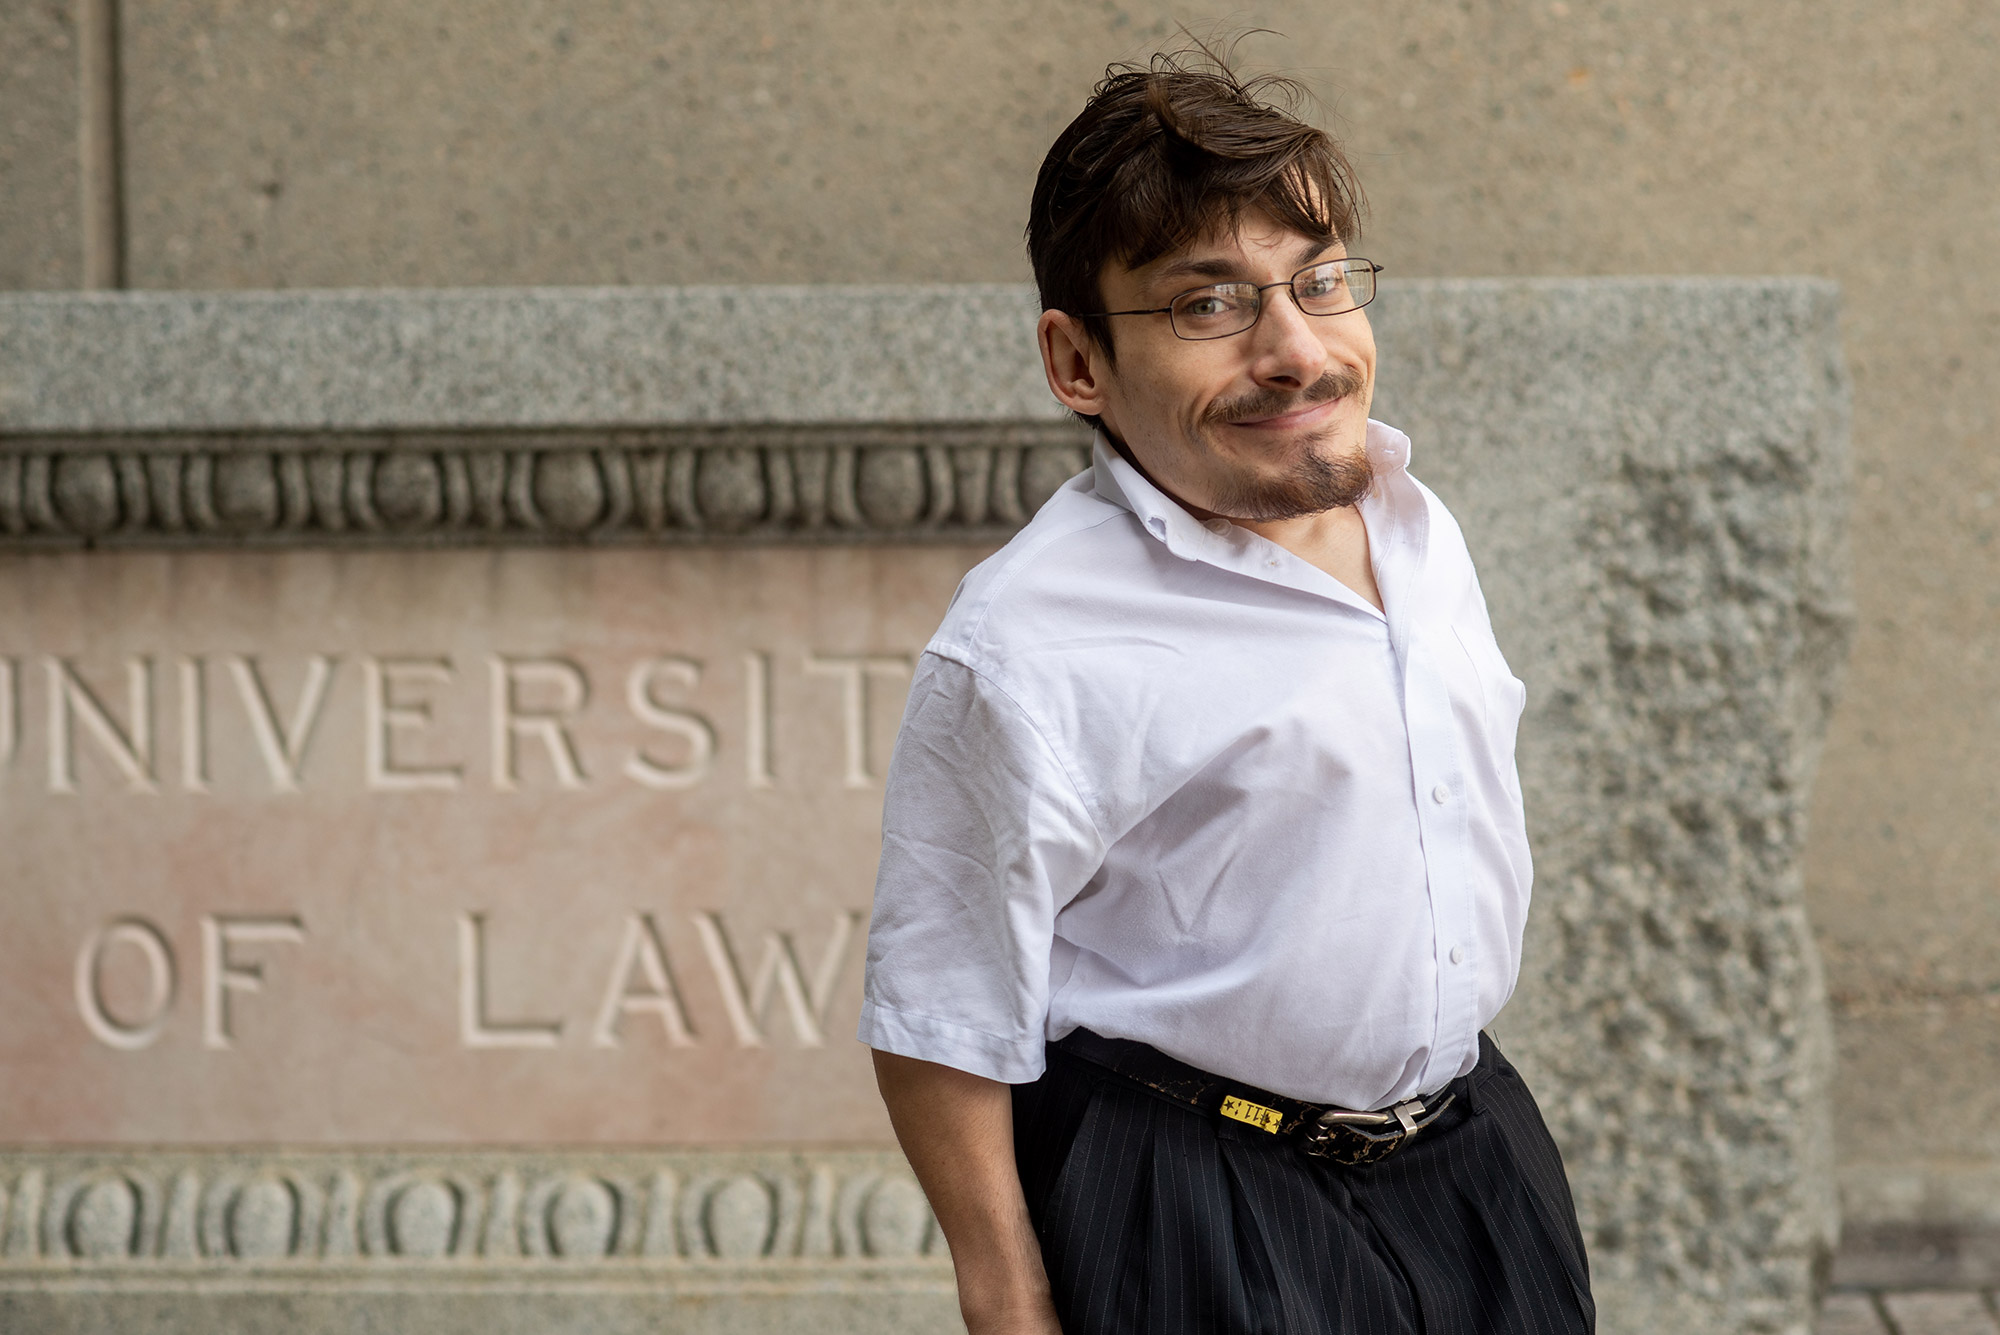 Photo of Gaetano Mortillaro in a white button down, black pants and glasses. He smiles, standing outside one of the LAW buildings and a sign “University Law” is seen in the background.